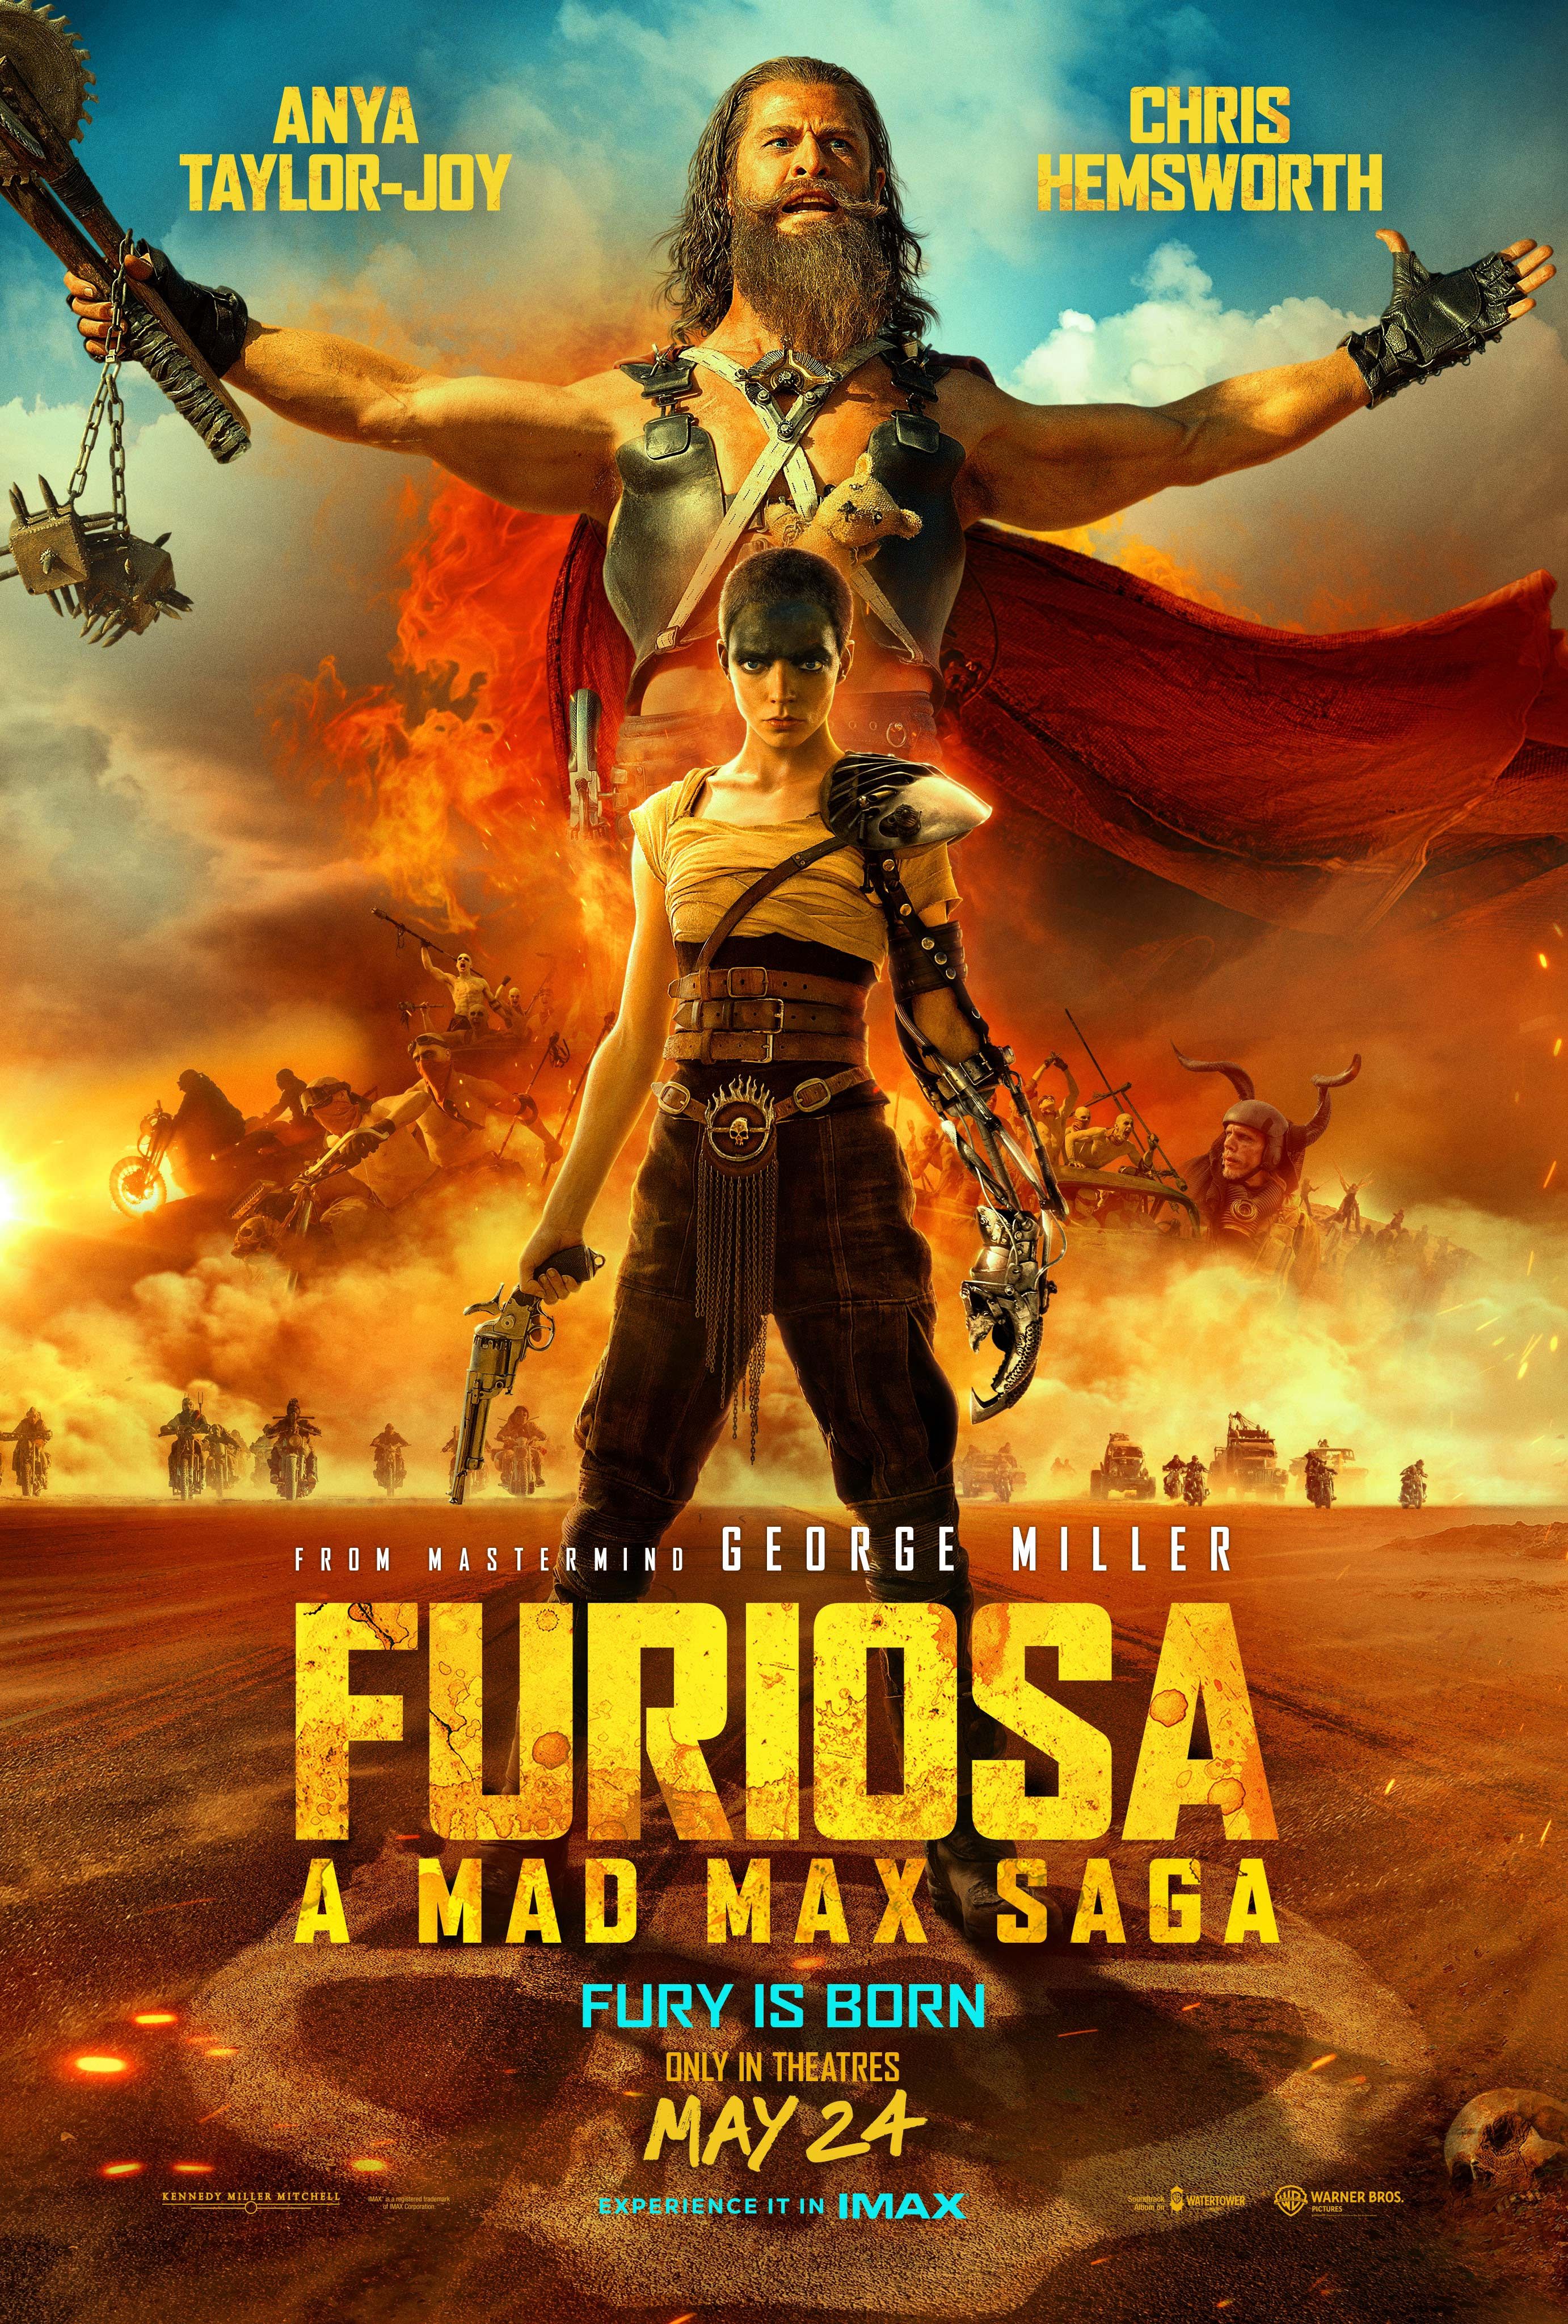 Furiosa Tops Global Box Office, But Doesn't Come Close To Repeating Mad